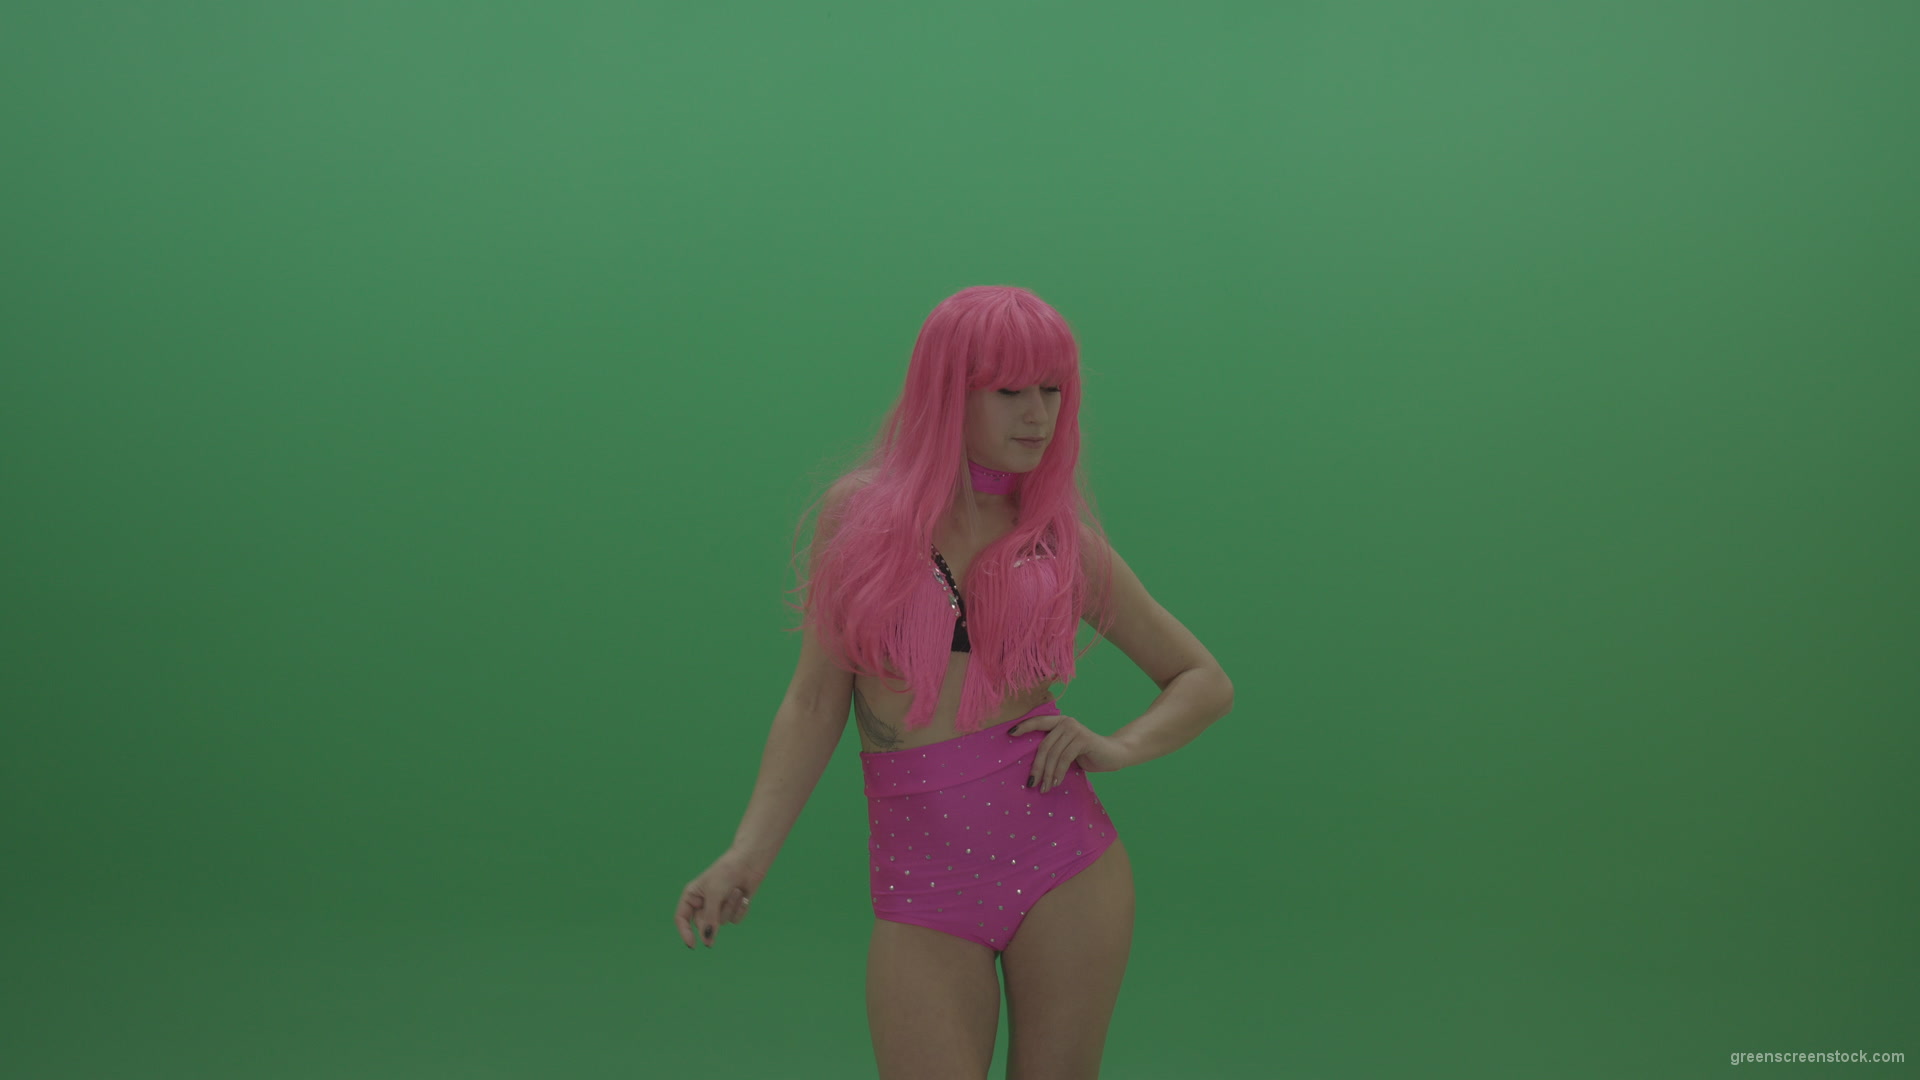 Gogo-dancer-in-pink-displays-an-amazing-pose-over-chromakey-background_002 Green Screen Stock